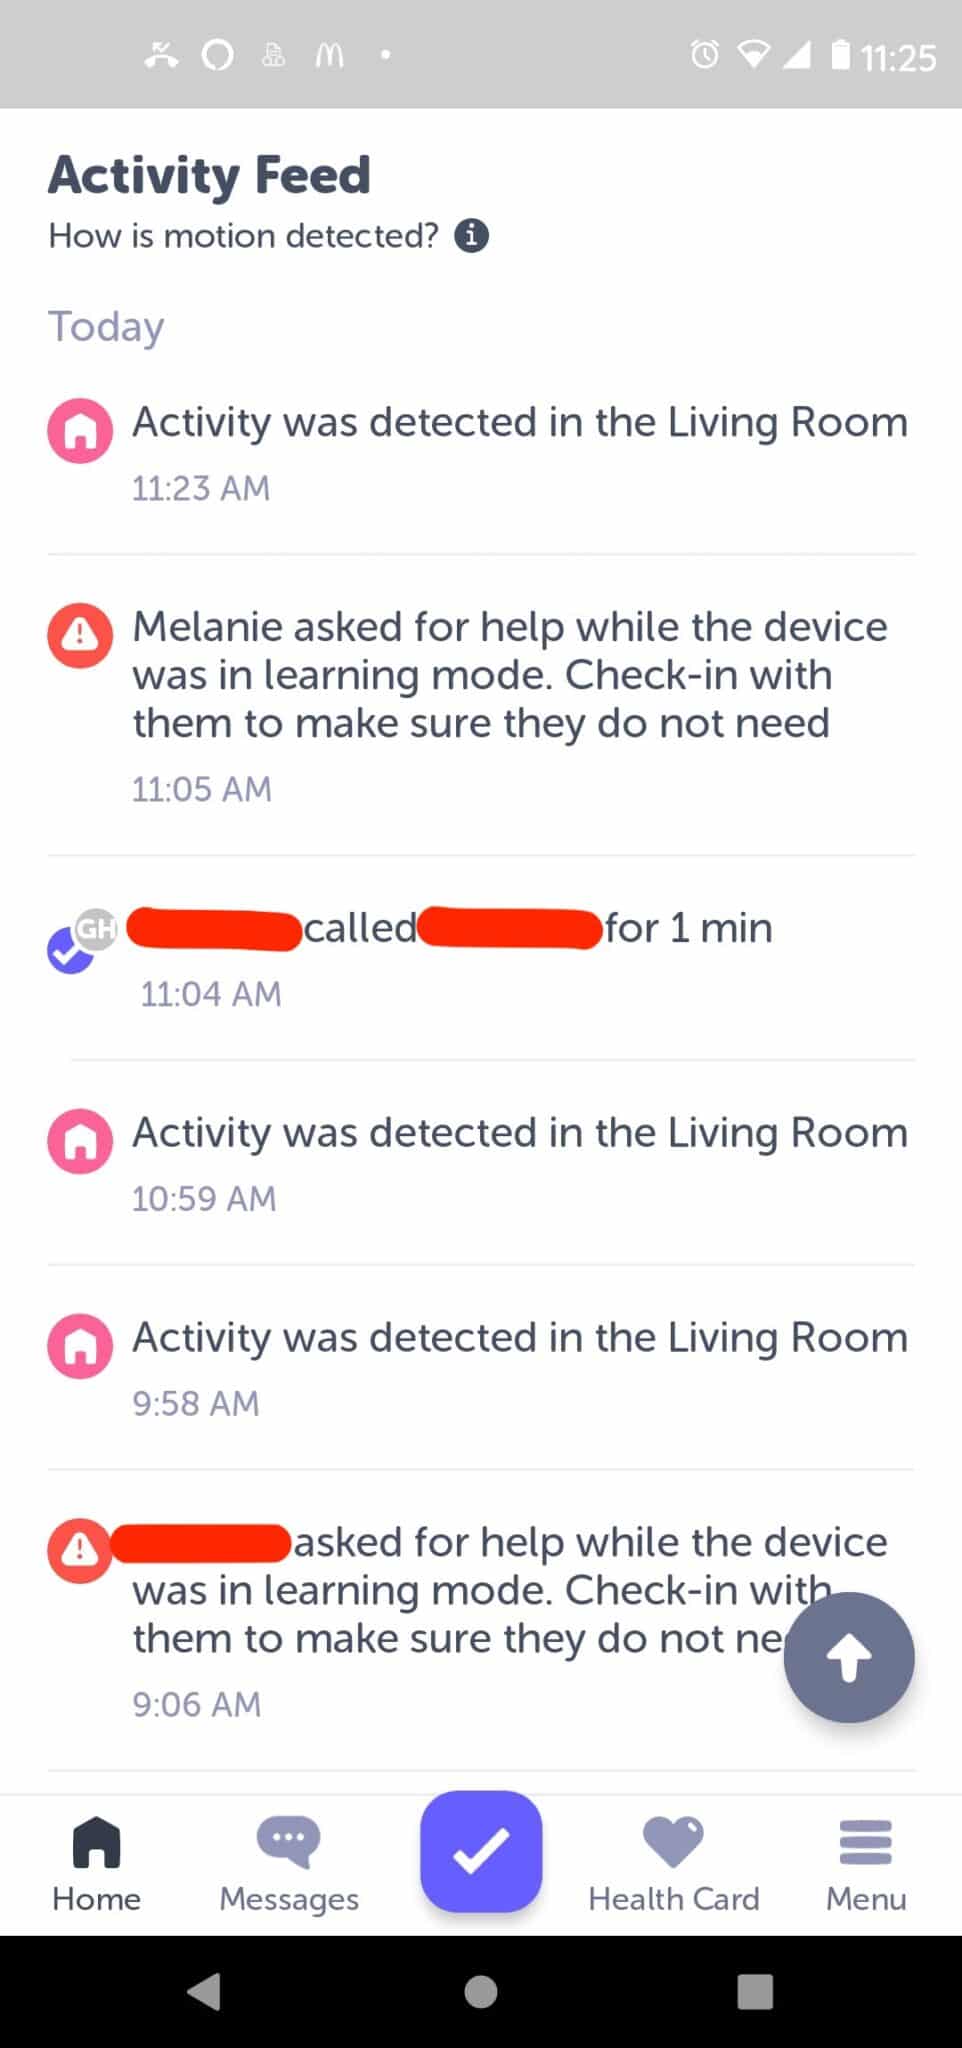 Activity feed displaying user movement and calls in the Aloe Care Health app.